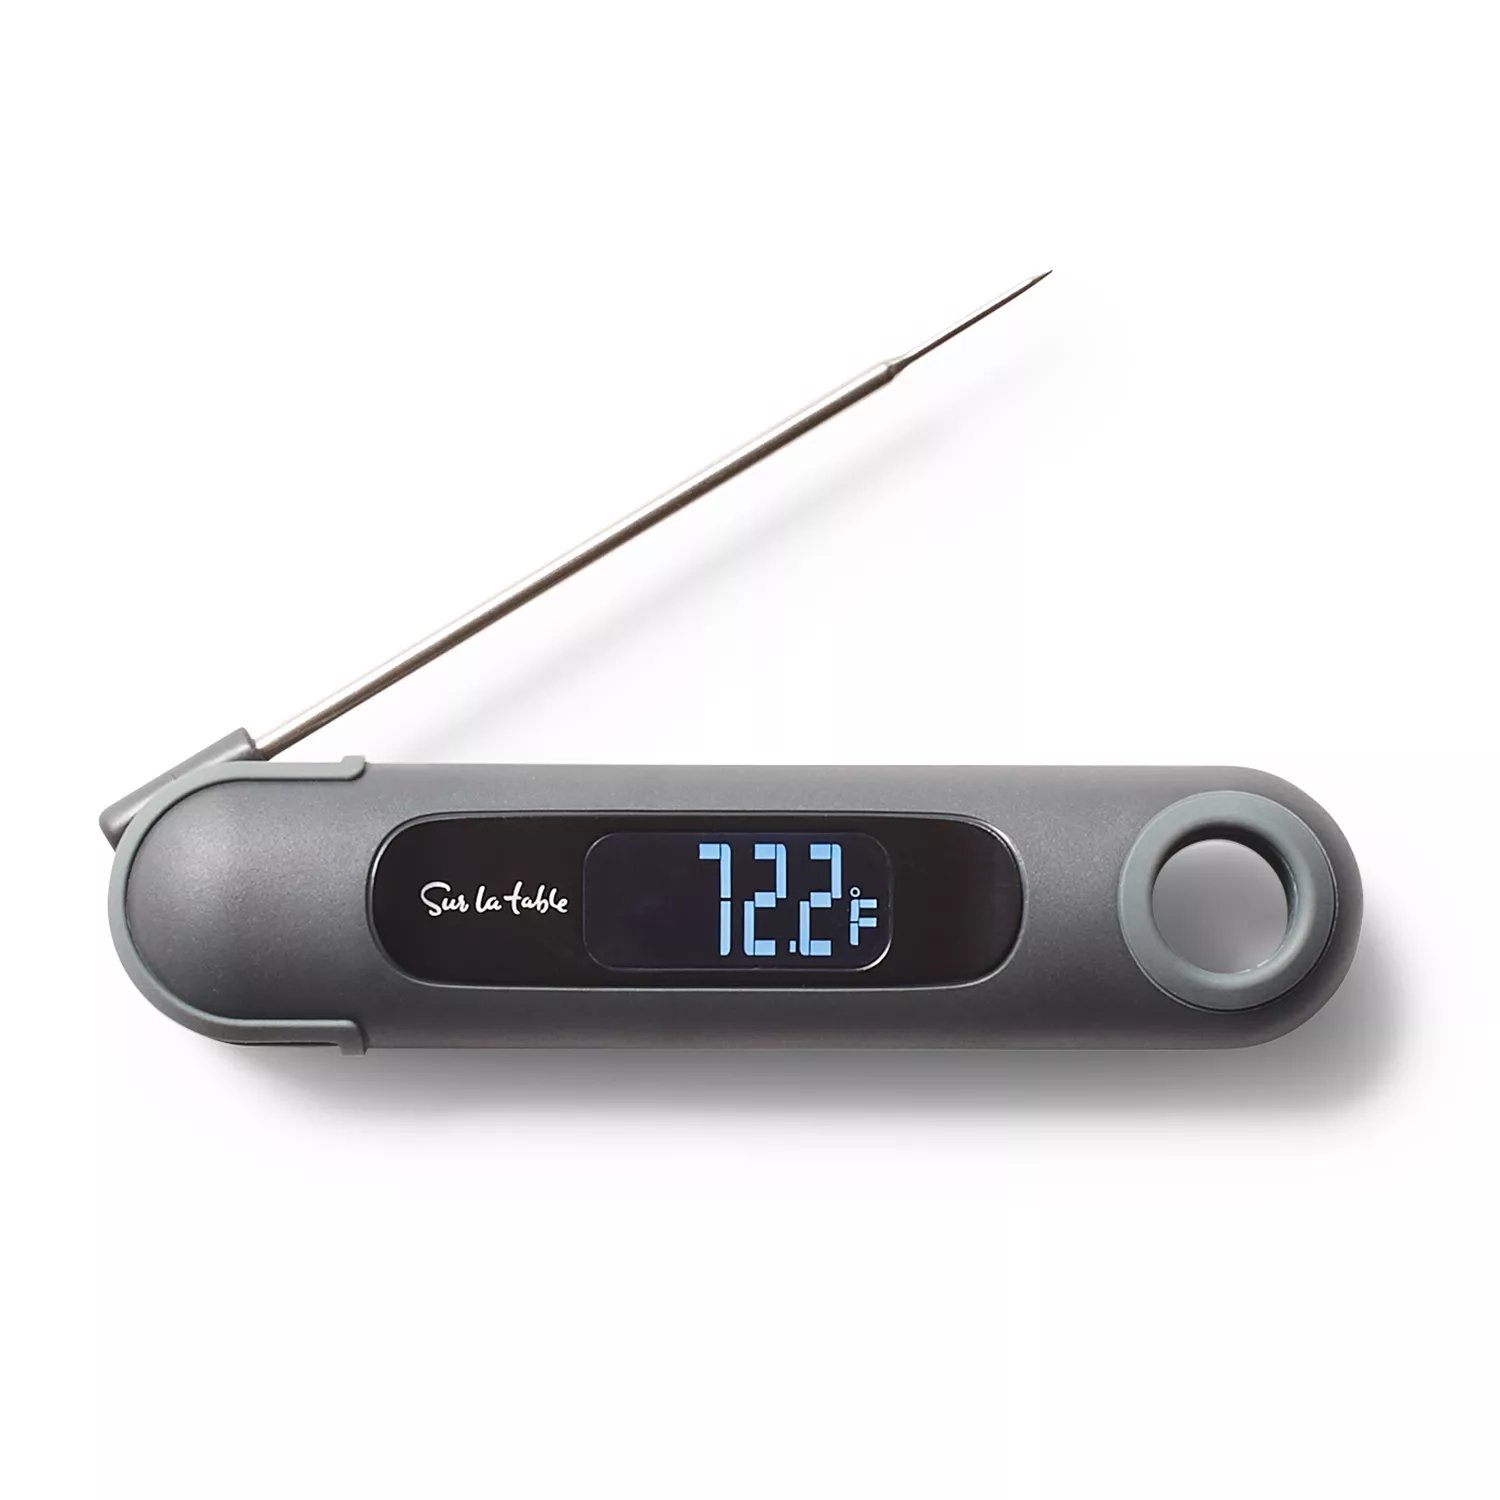  Maverick CT-03 Digital Oil & Candy Thermomter: Meat